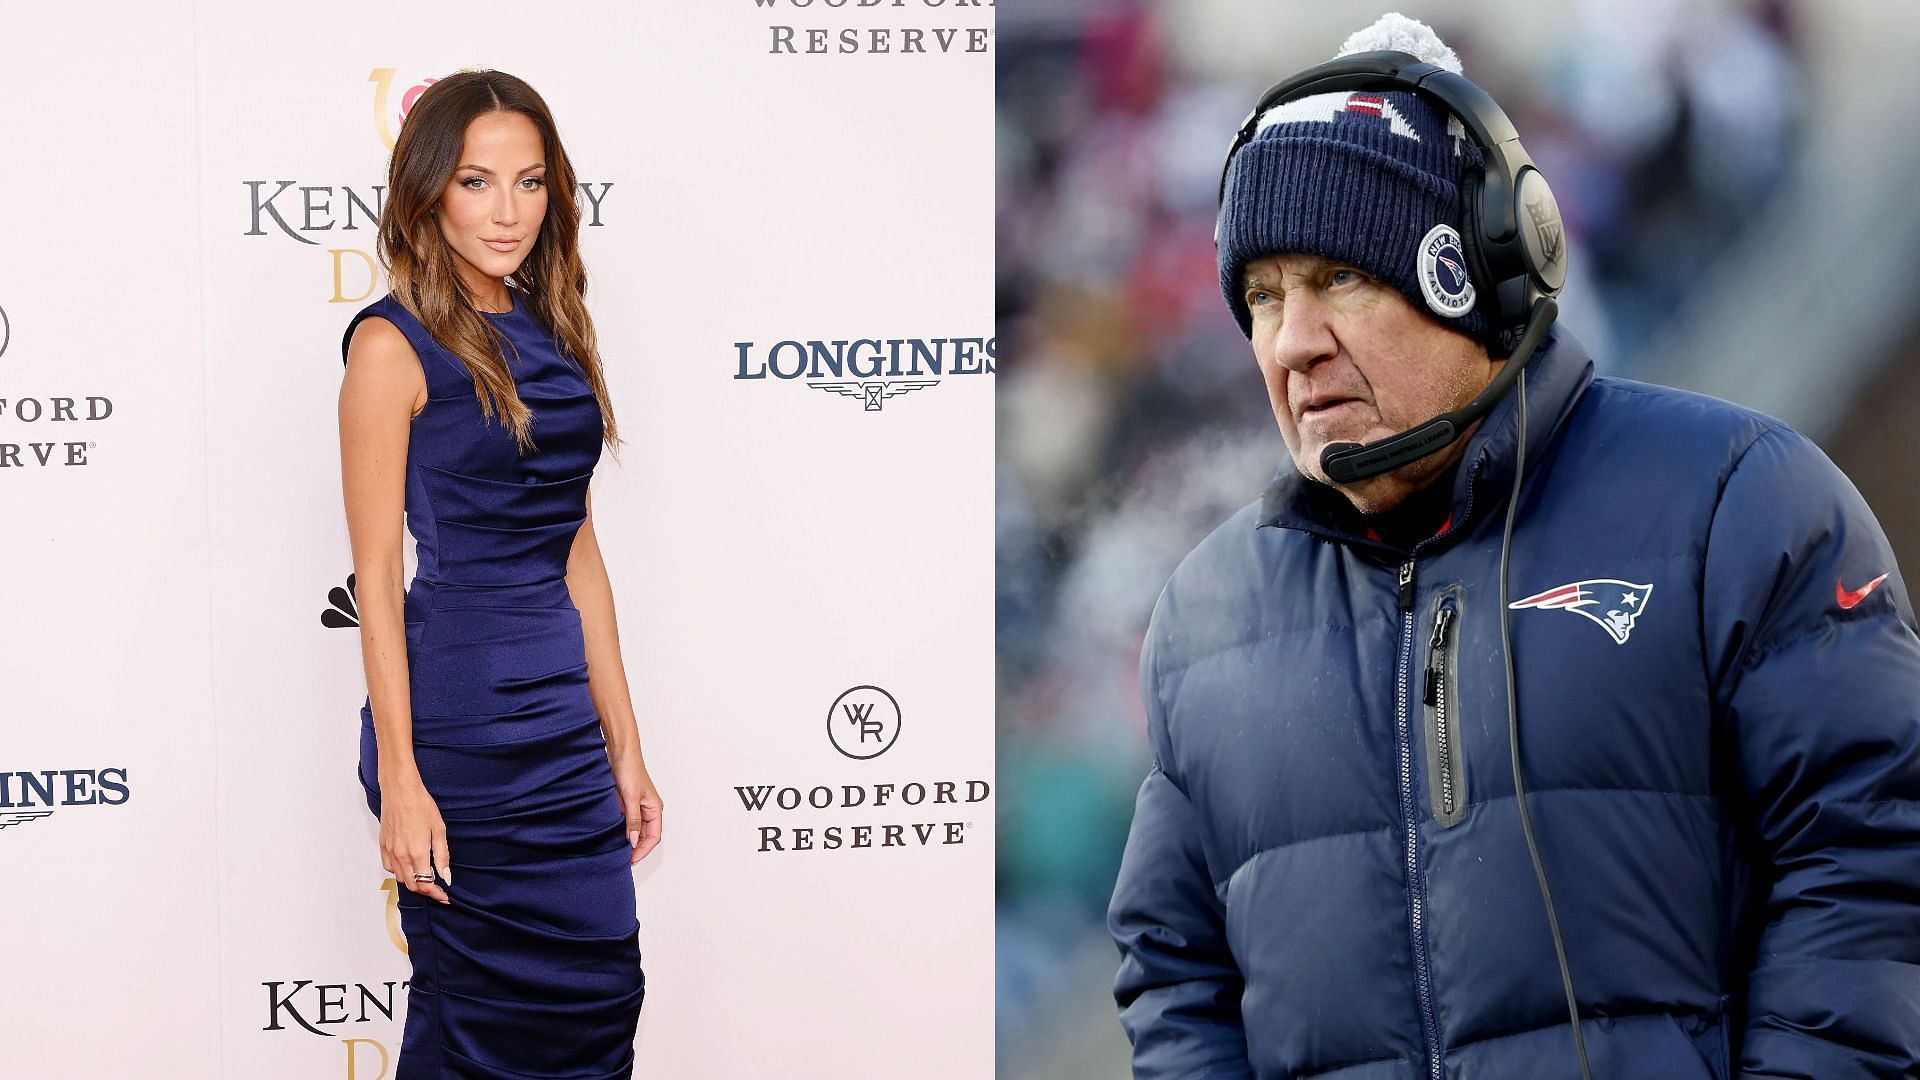 The Kay Adams Show had some interesting thoughts on Patriots head coach Bill Belichick.